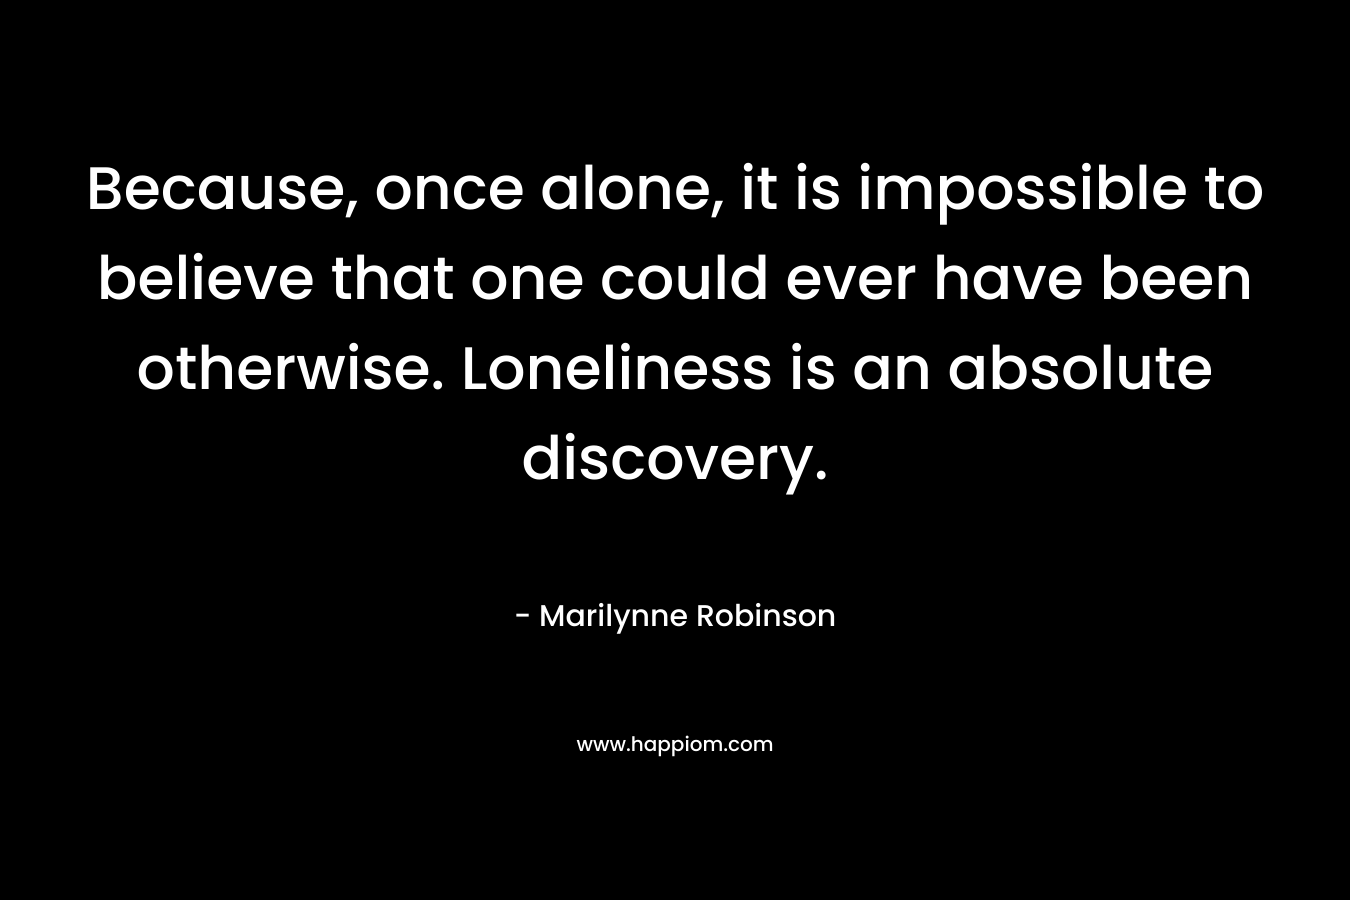 Because, once alone, it is impossible to believe that one could ever have been otherwise. Loneliness is an absolute discovery.